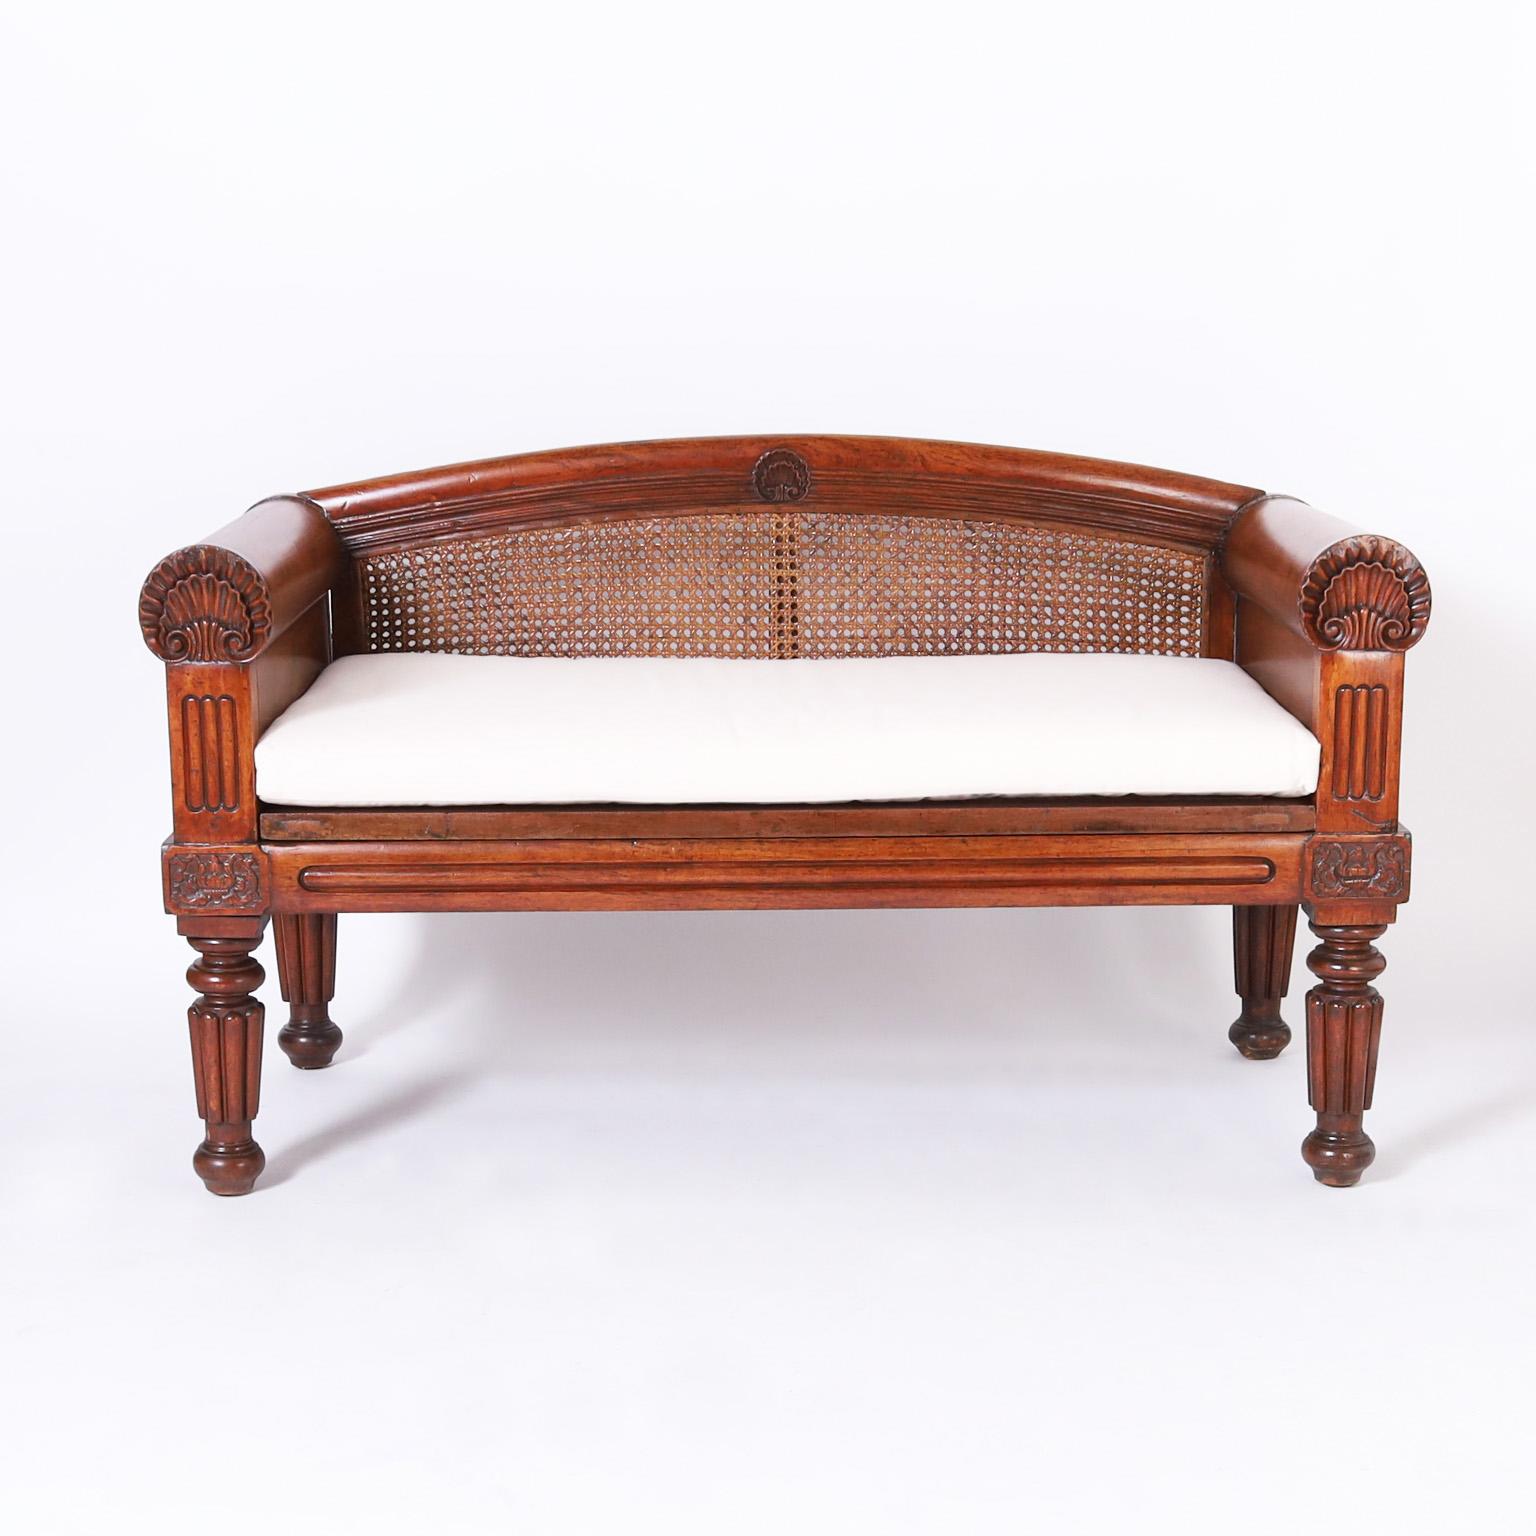 Impressive 19th century British Colonial settee handcrafted in mahogany with a caned back and seat featuring sea shell carvings on the back and arms, floral carvings on the knees and bold turned and beaded legs.